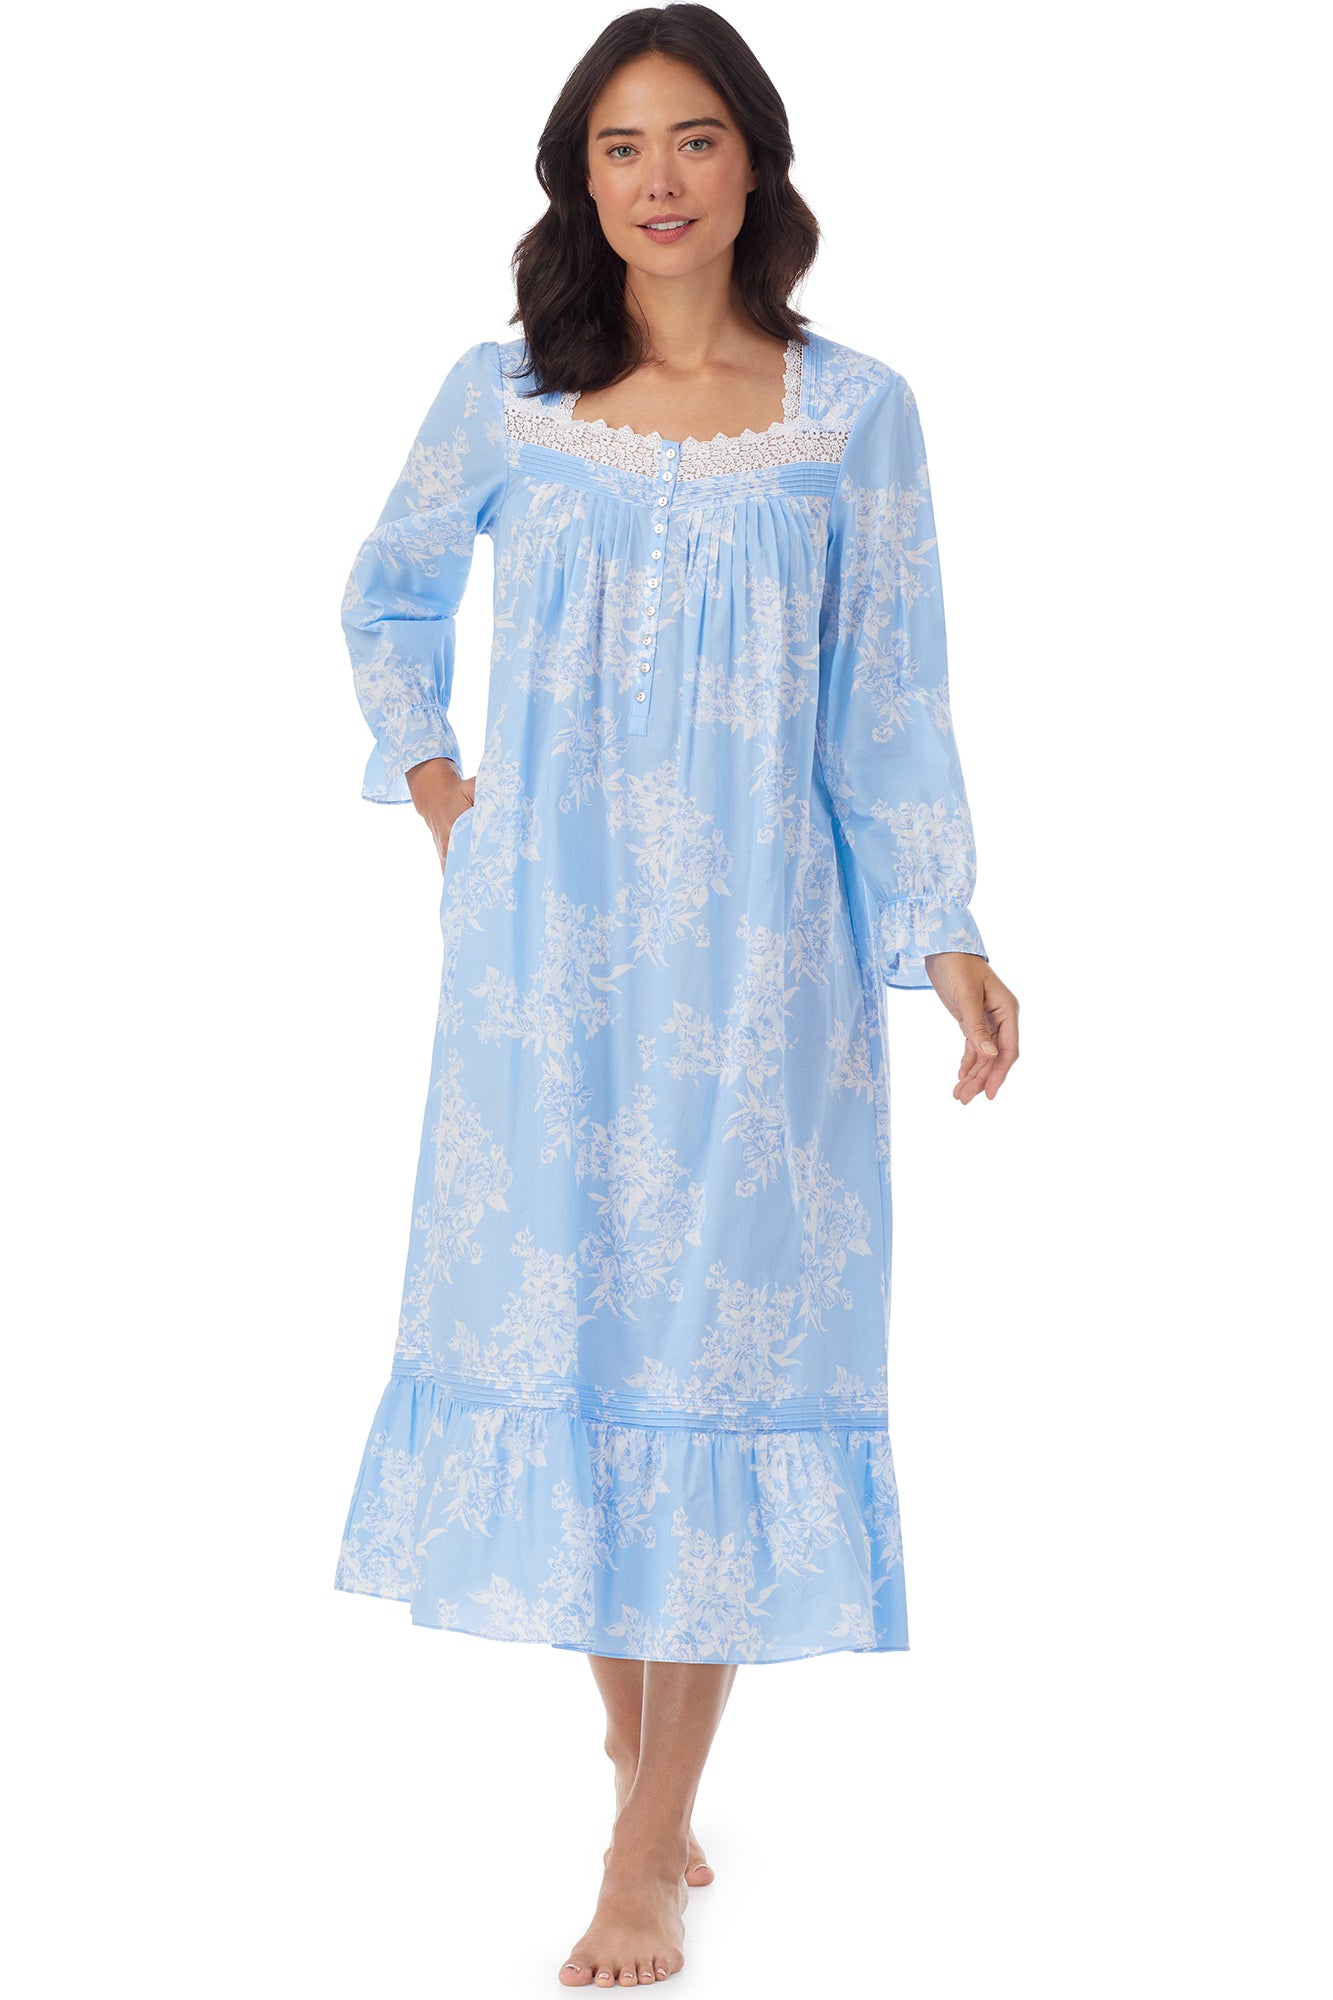 A lady long sleeve nightgown plus with wihite floral pattern